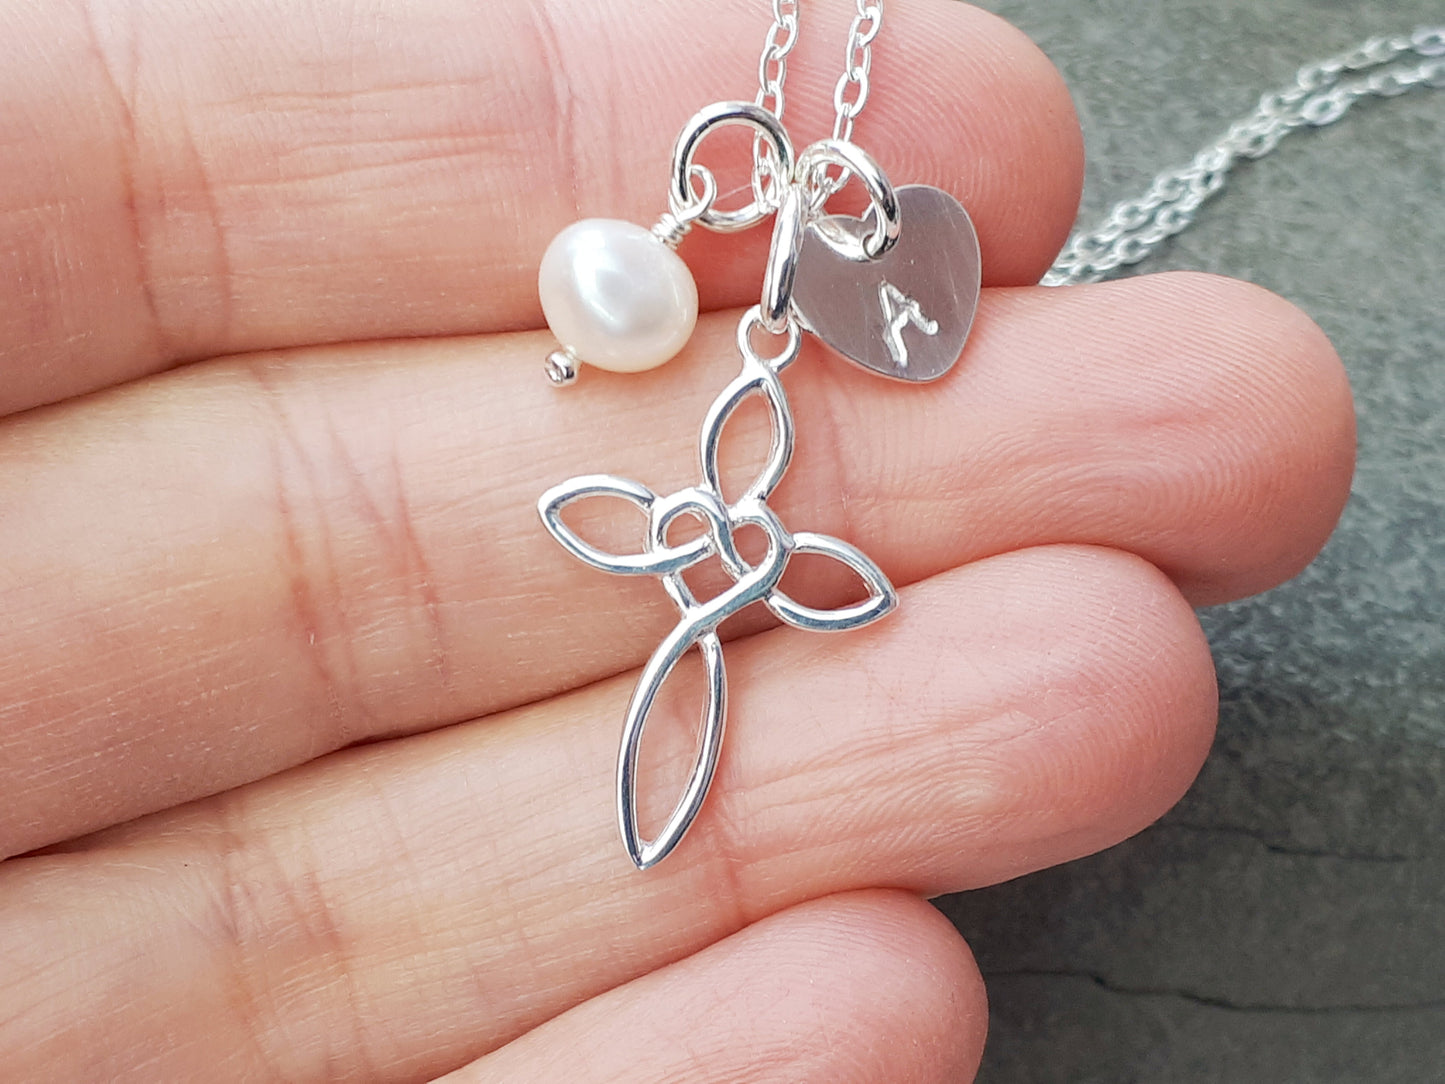 Cross and chain necklace in silver. Confirmation gift.